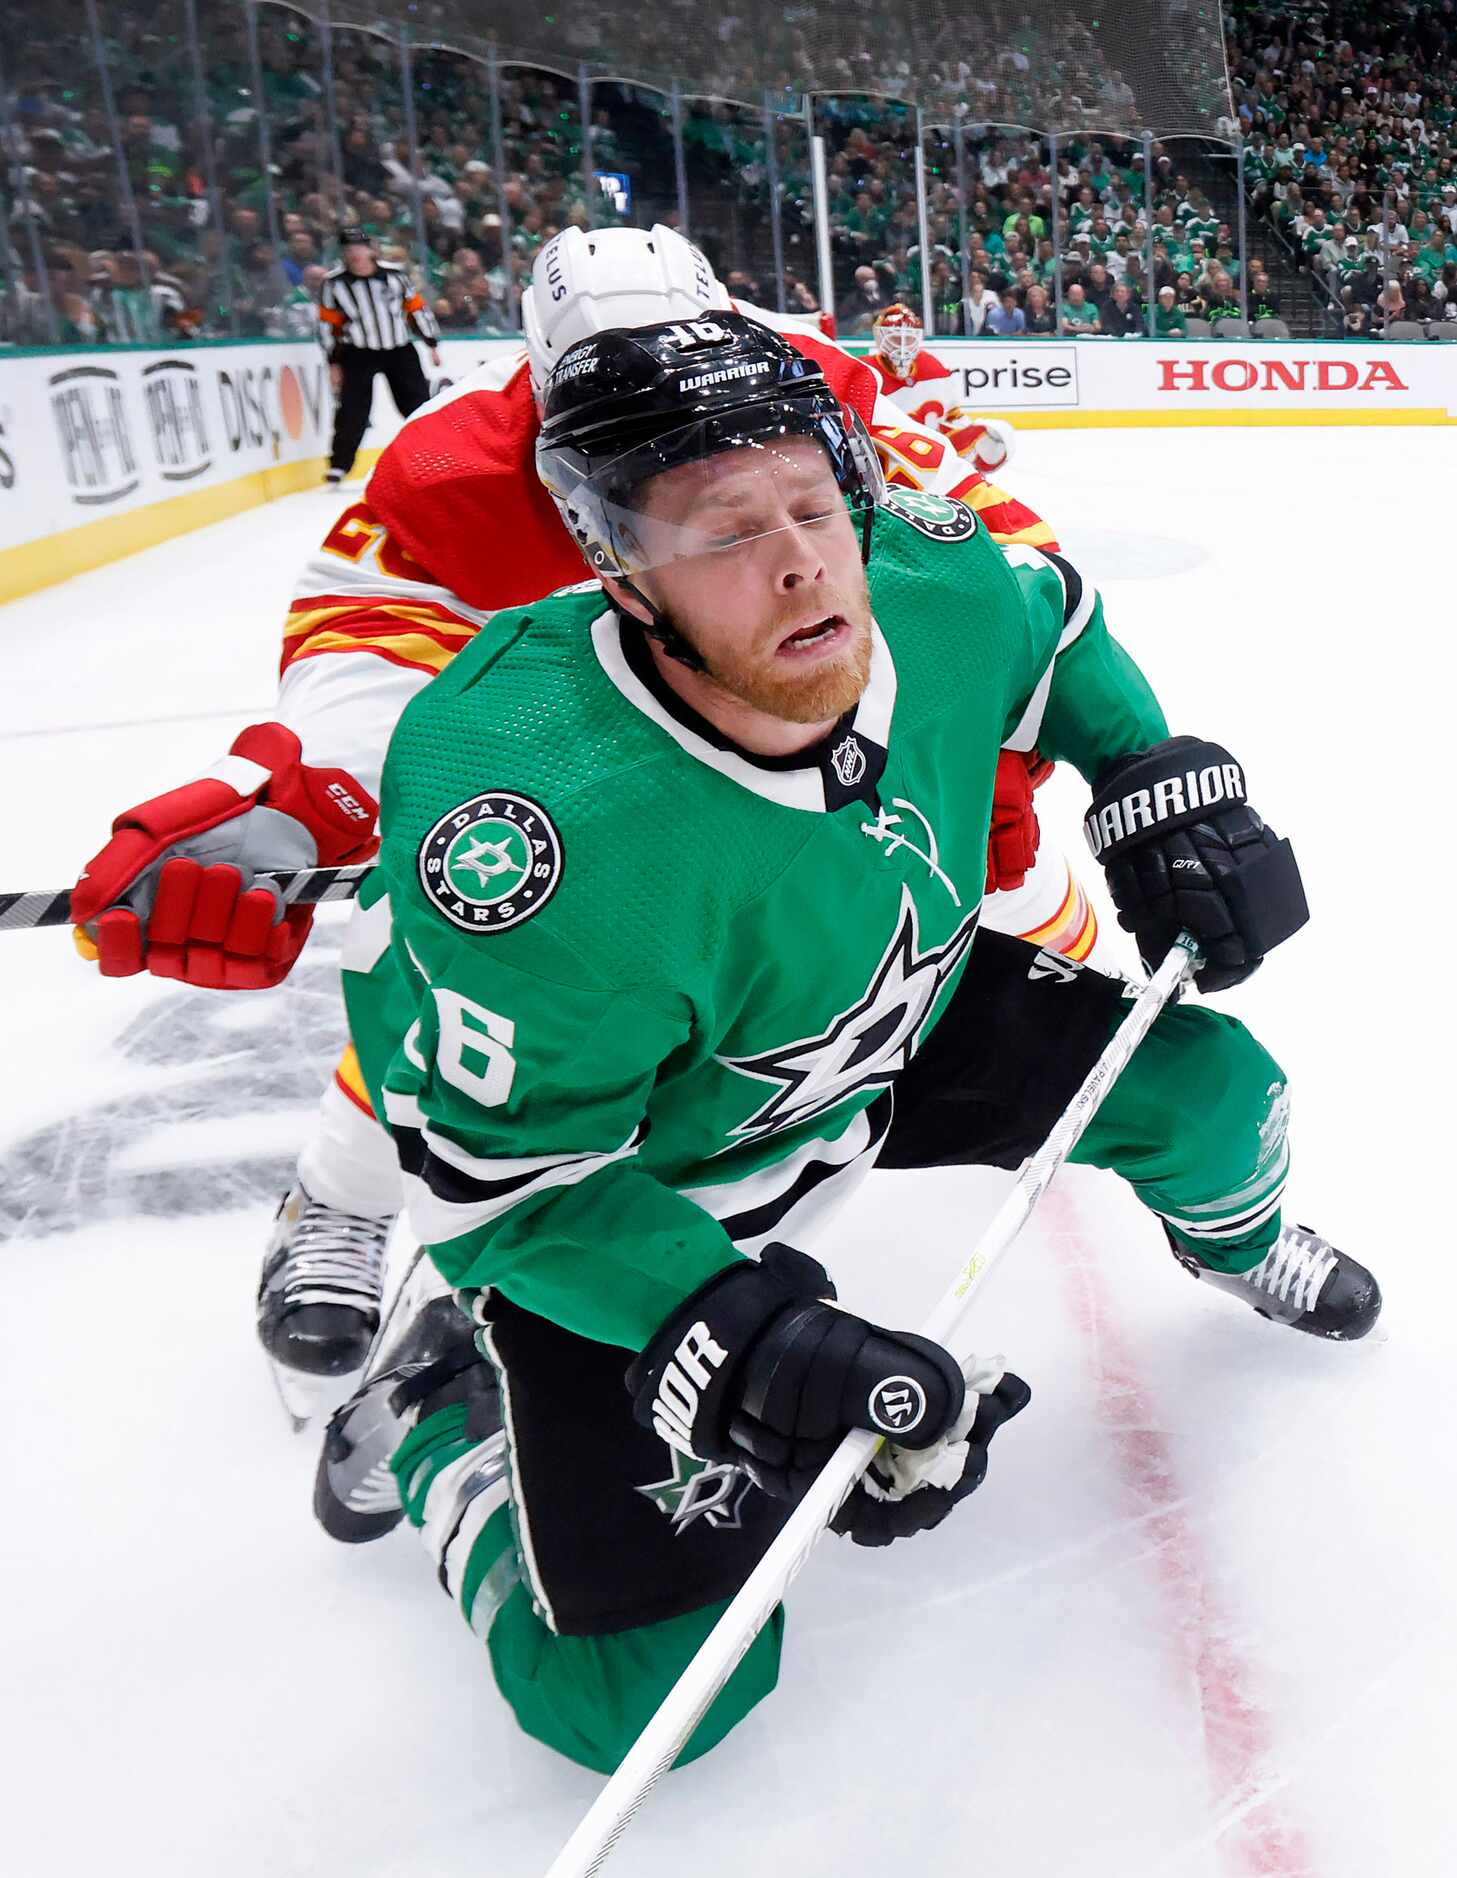 Dallas Stars center Joe Pavelski (16) is checked to the ice by Calgary Flames defenseman...